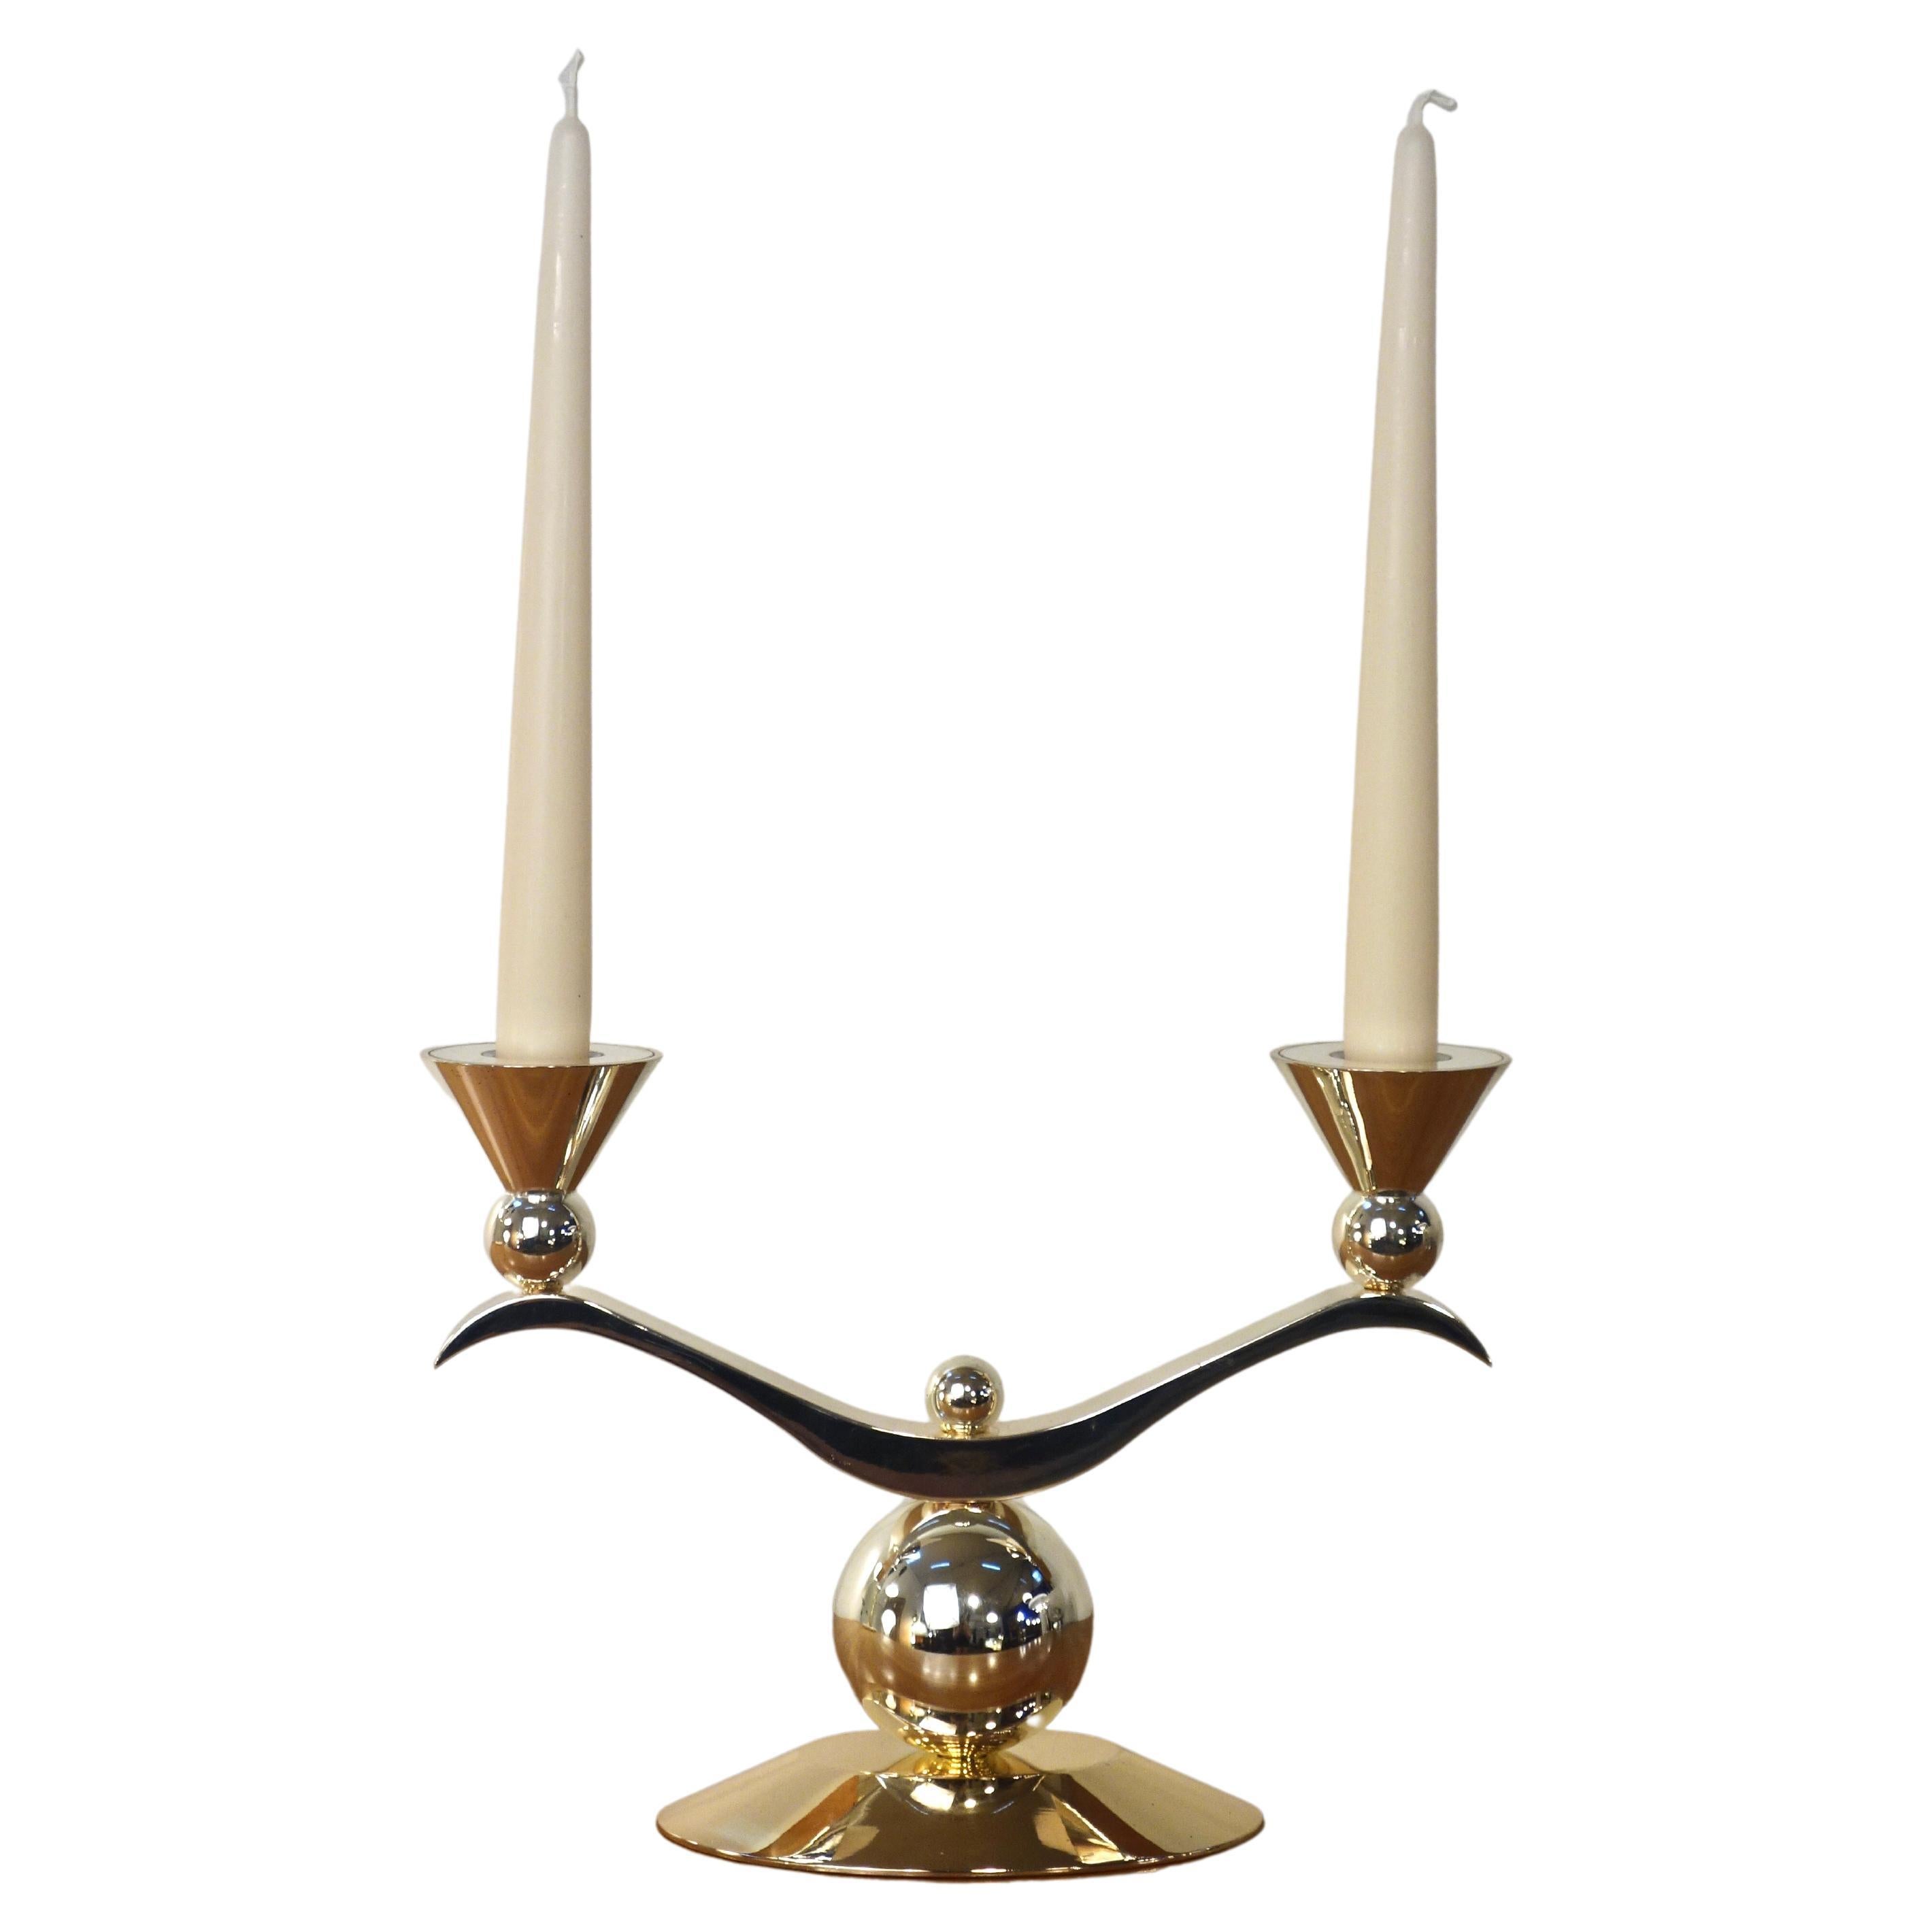 Vintage Art Deco style double candle holder For Sale